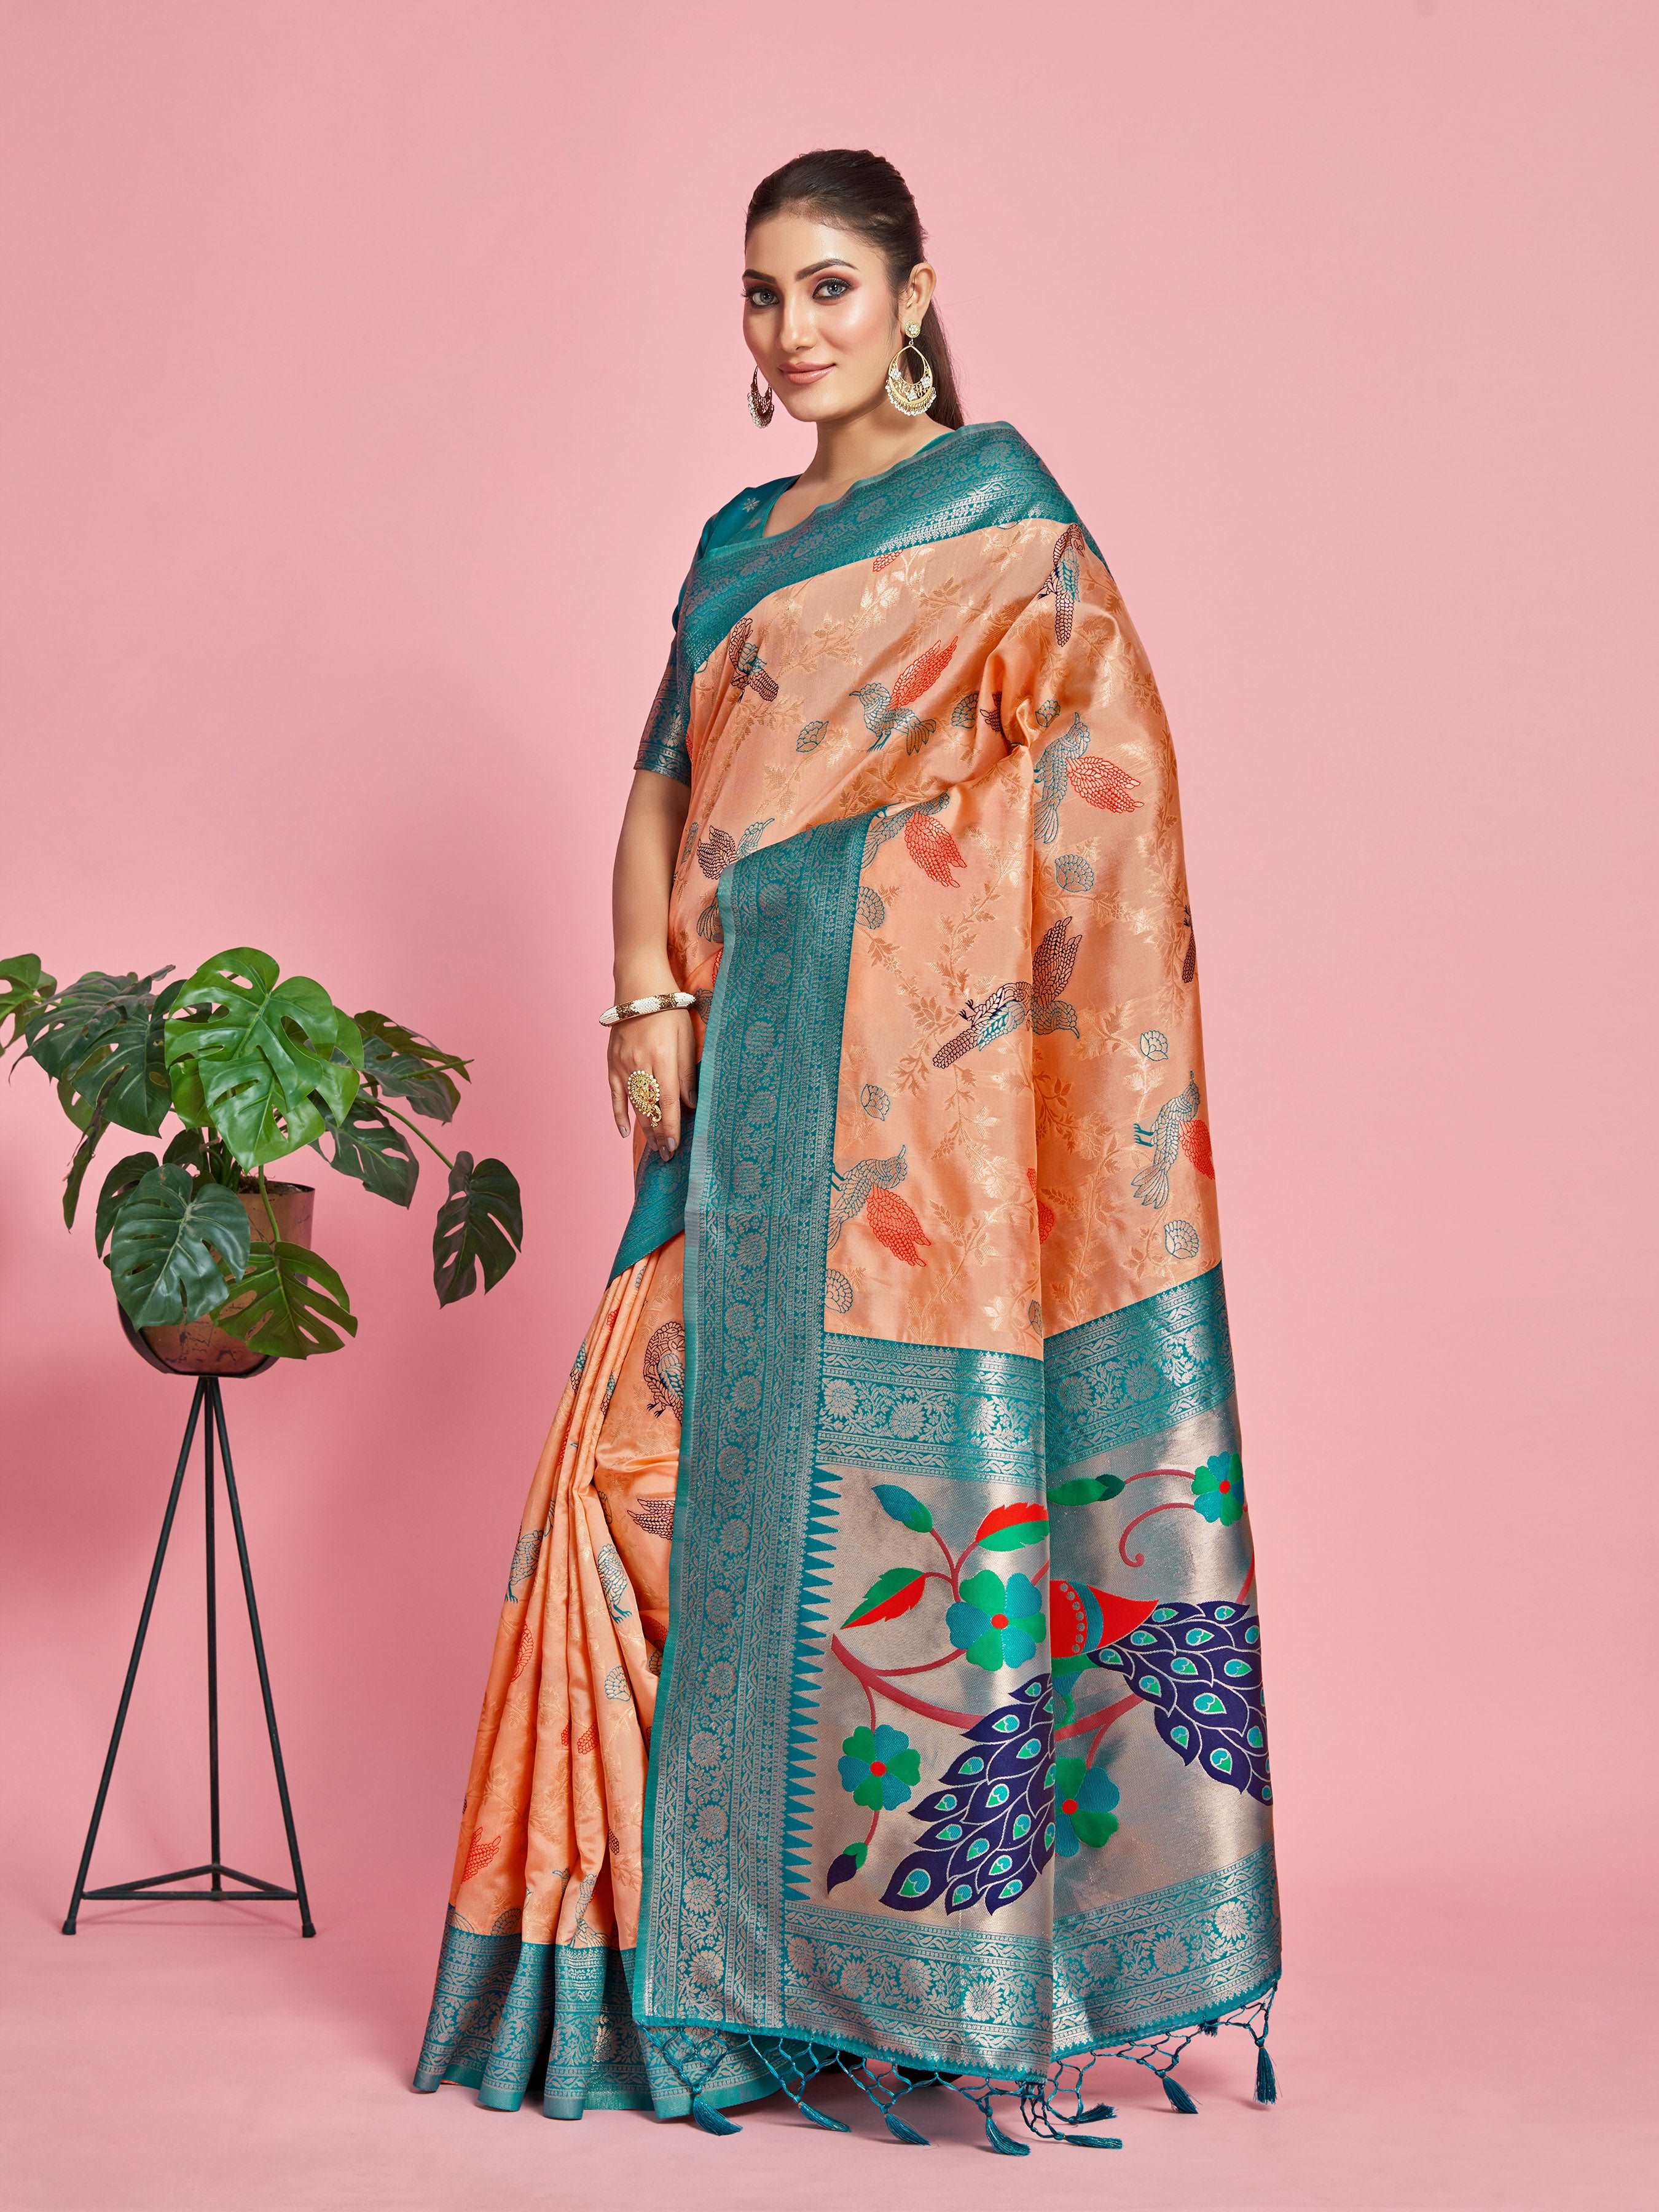 Pretty blouse with Lenin saree - Shruthireddy Designers | Facebook